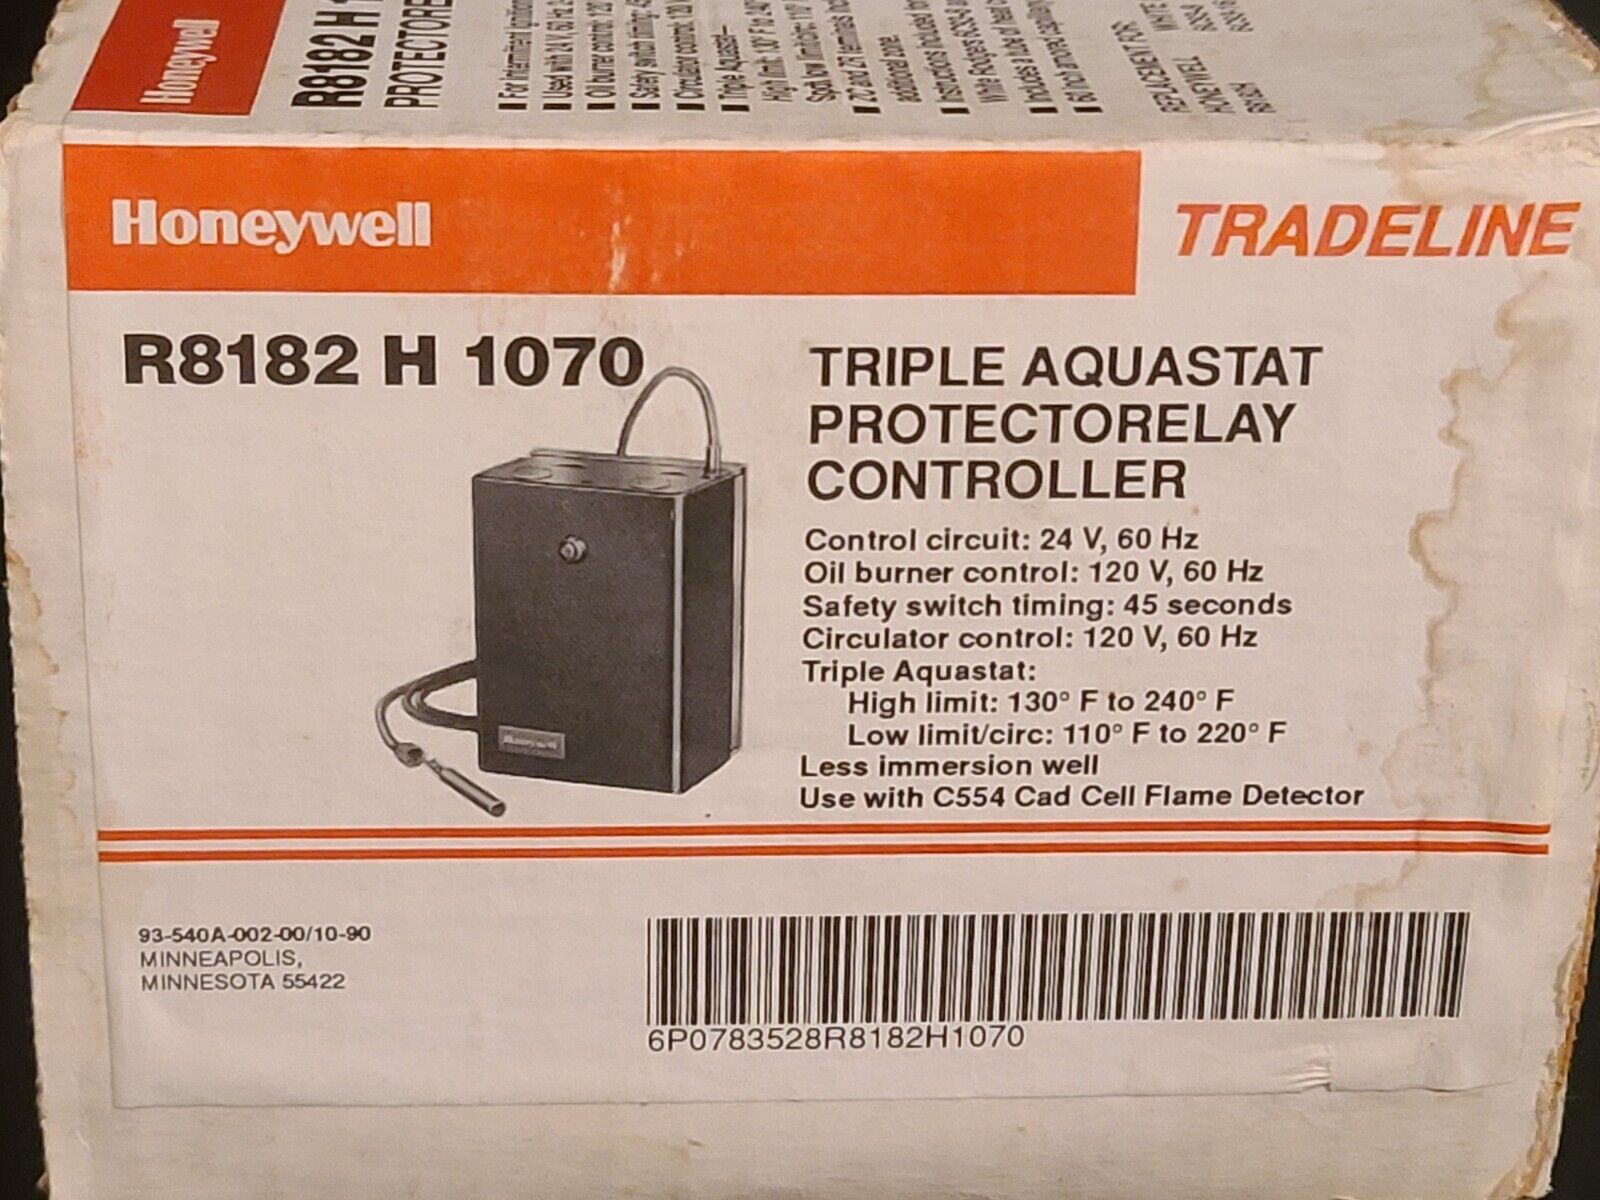 NEW IN BOX Honeywell R8182H1070 Protectorelay / Hydronic Heating Control